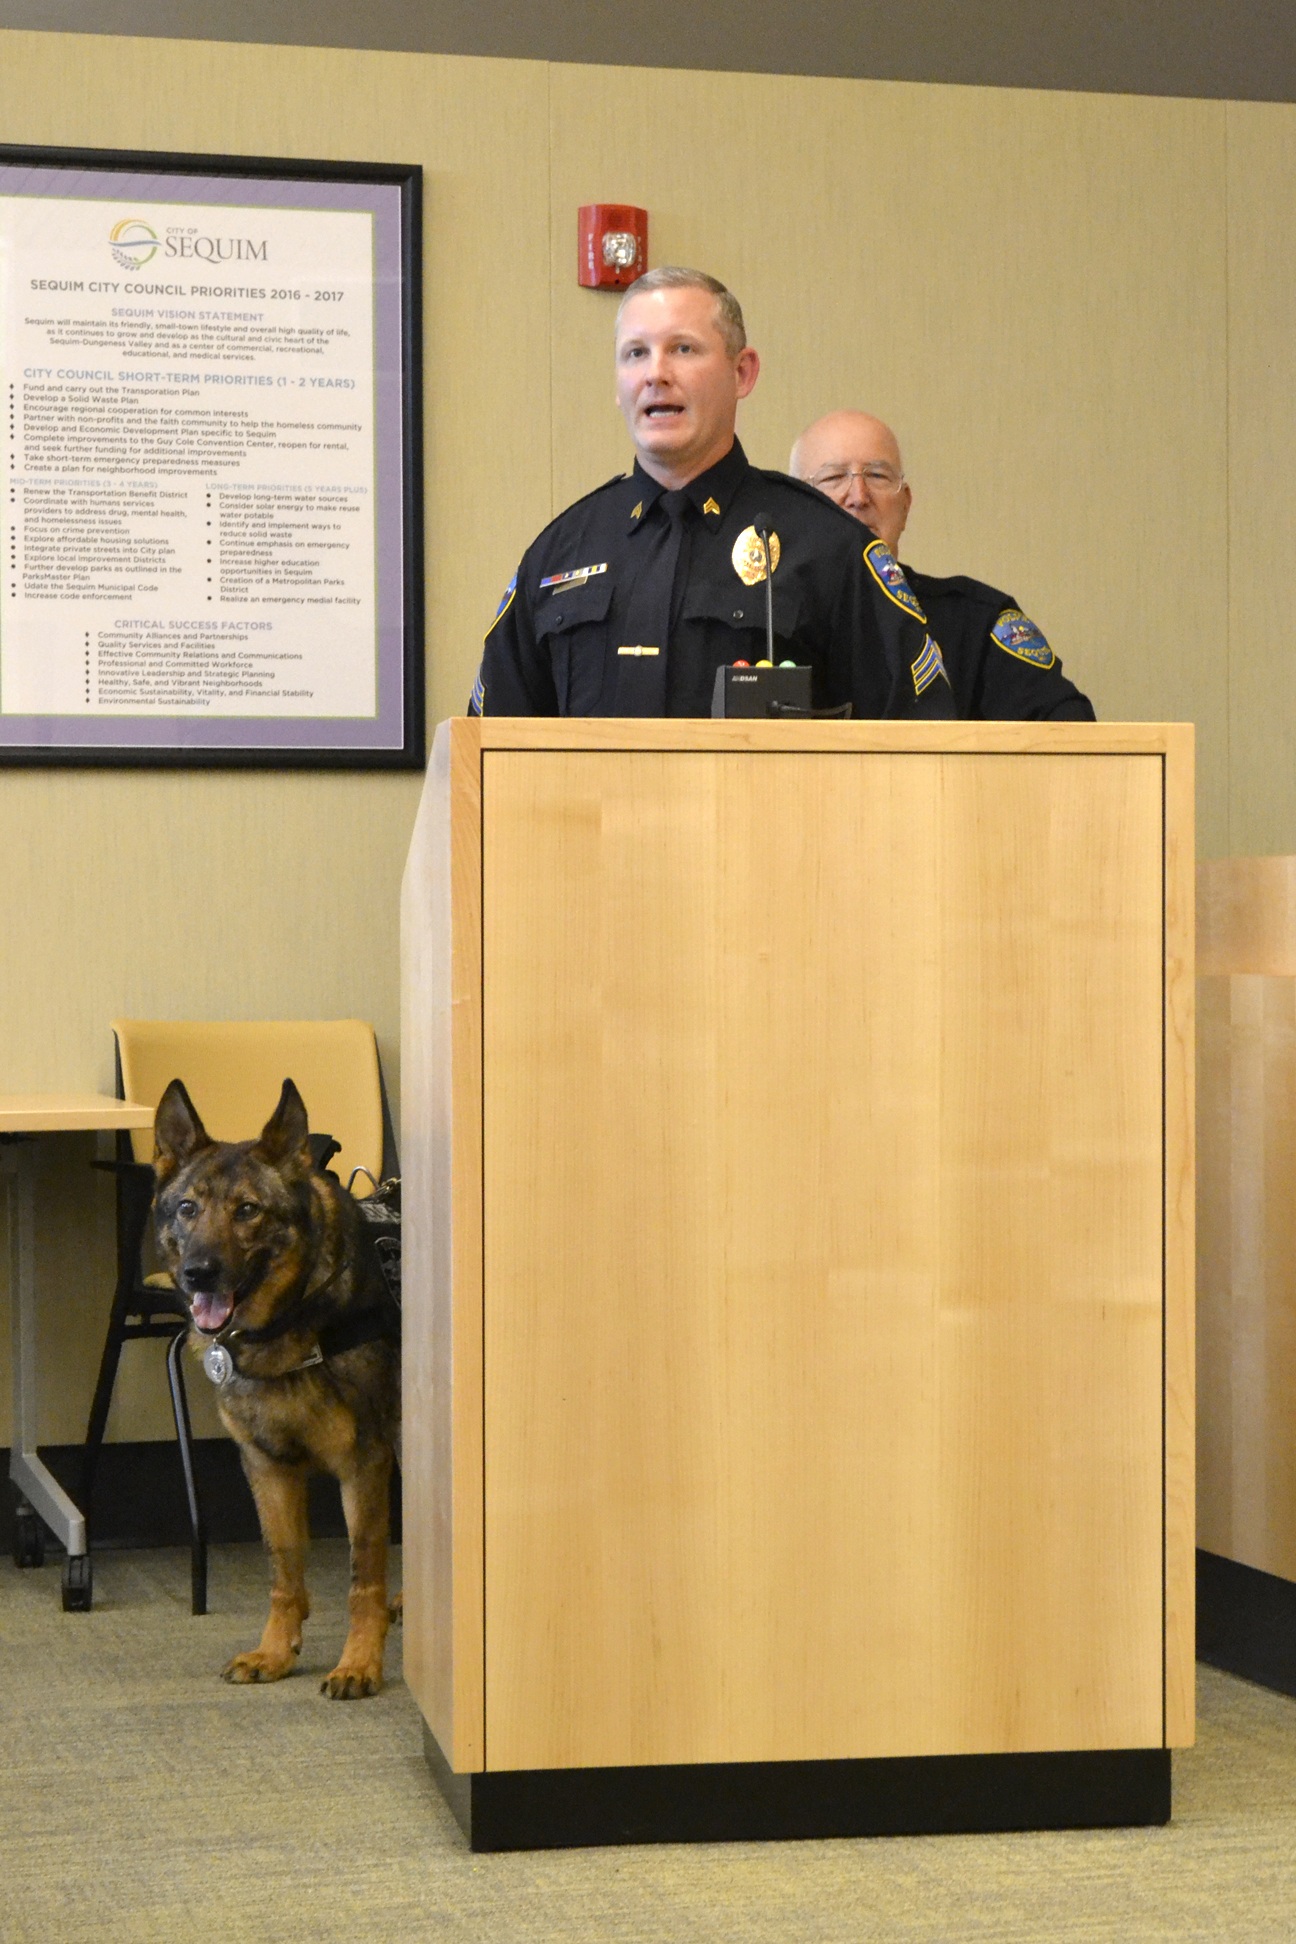 Sgt. Mike Hill speaks about his former partner Chase the K-9 officer, who officially retired Monday after being with the Sequim Police Department since 2008. Police Chief Bill Dickinson said he plans to continue the K-9 officer program in the coming months after they find a replacement dog and begin training new K-9 officer Tony Bush. (Matthew Nash/Olympic Peninsula News Group)